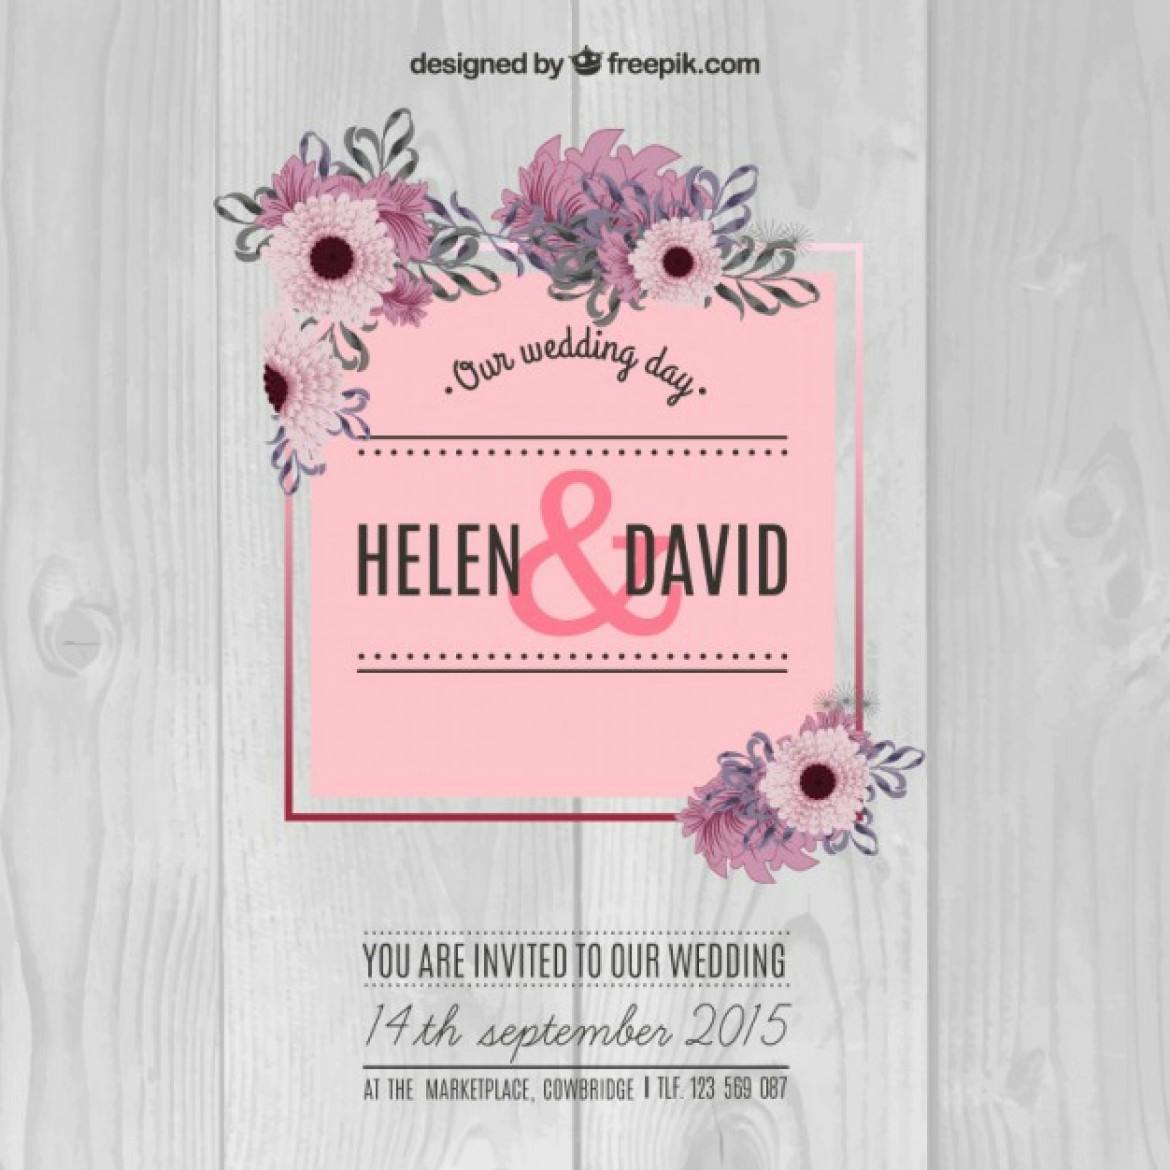 wpid-floral-wedding-card-in-spring-style_23-2147508970-1170x1170